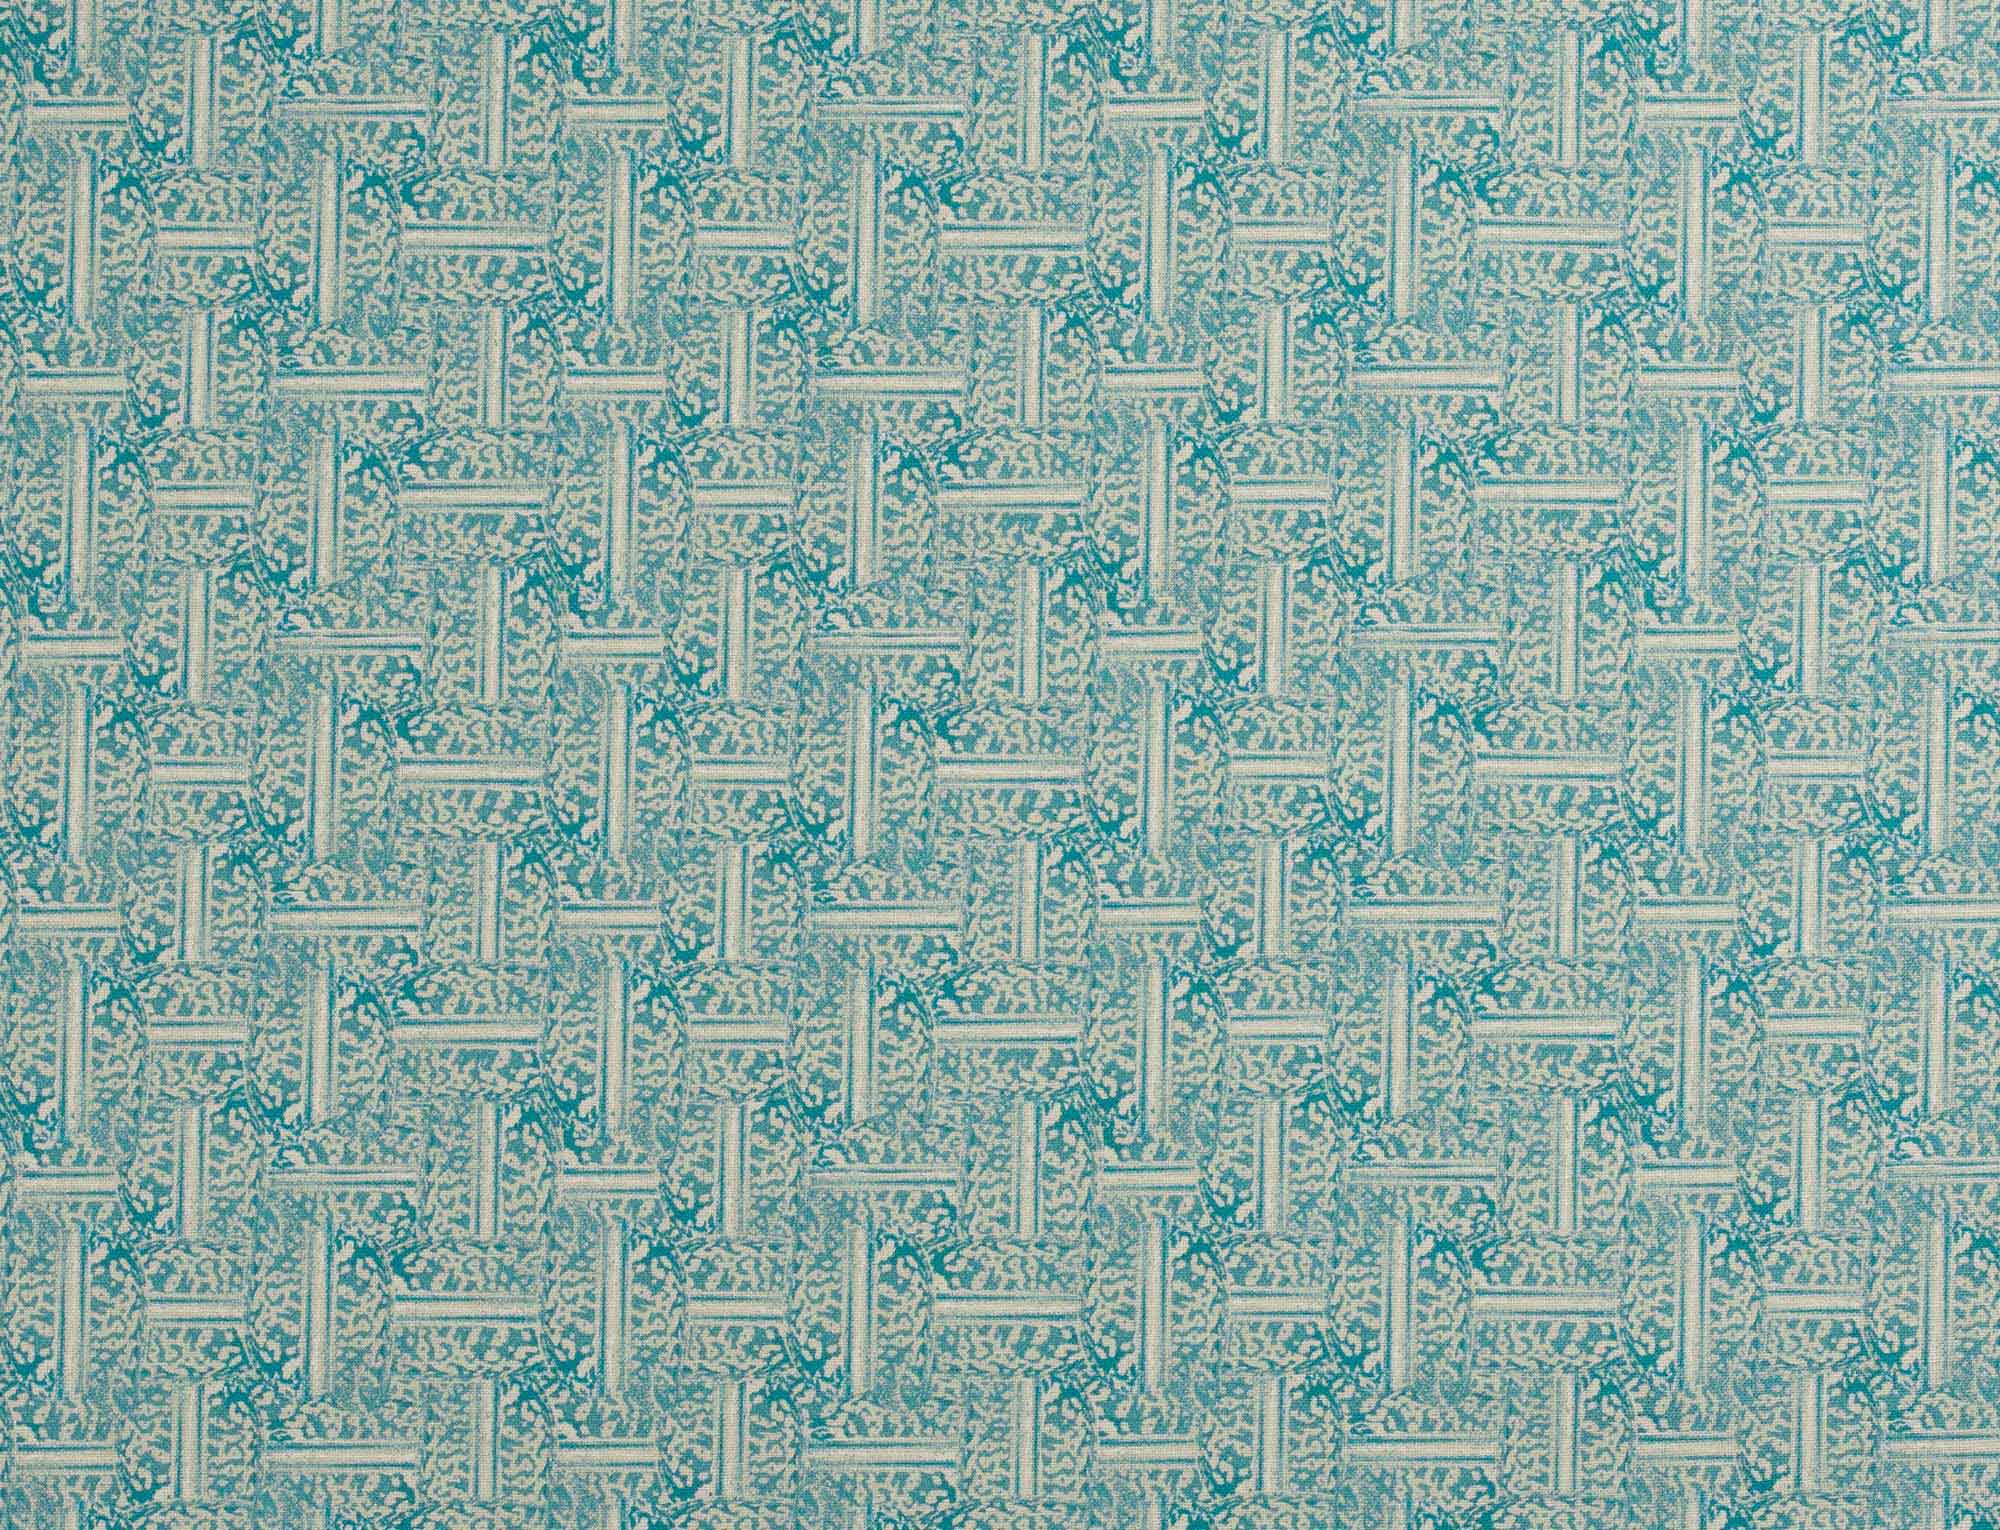 Detail of fabric in a geometric grid pattern in turquoise on a cream field.